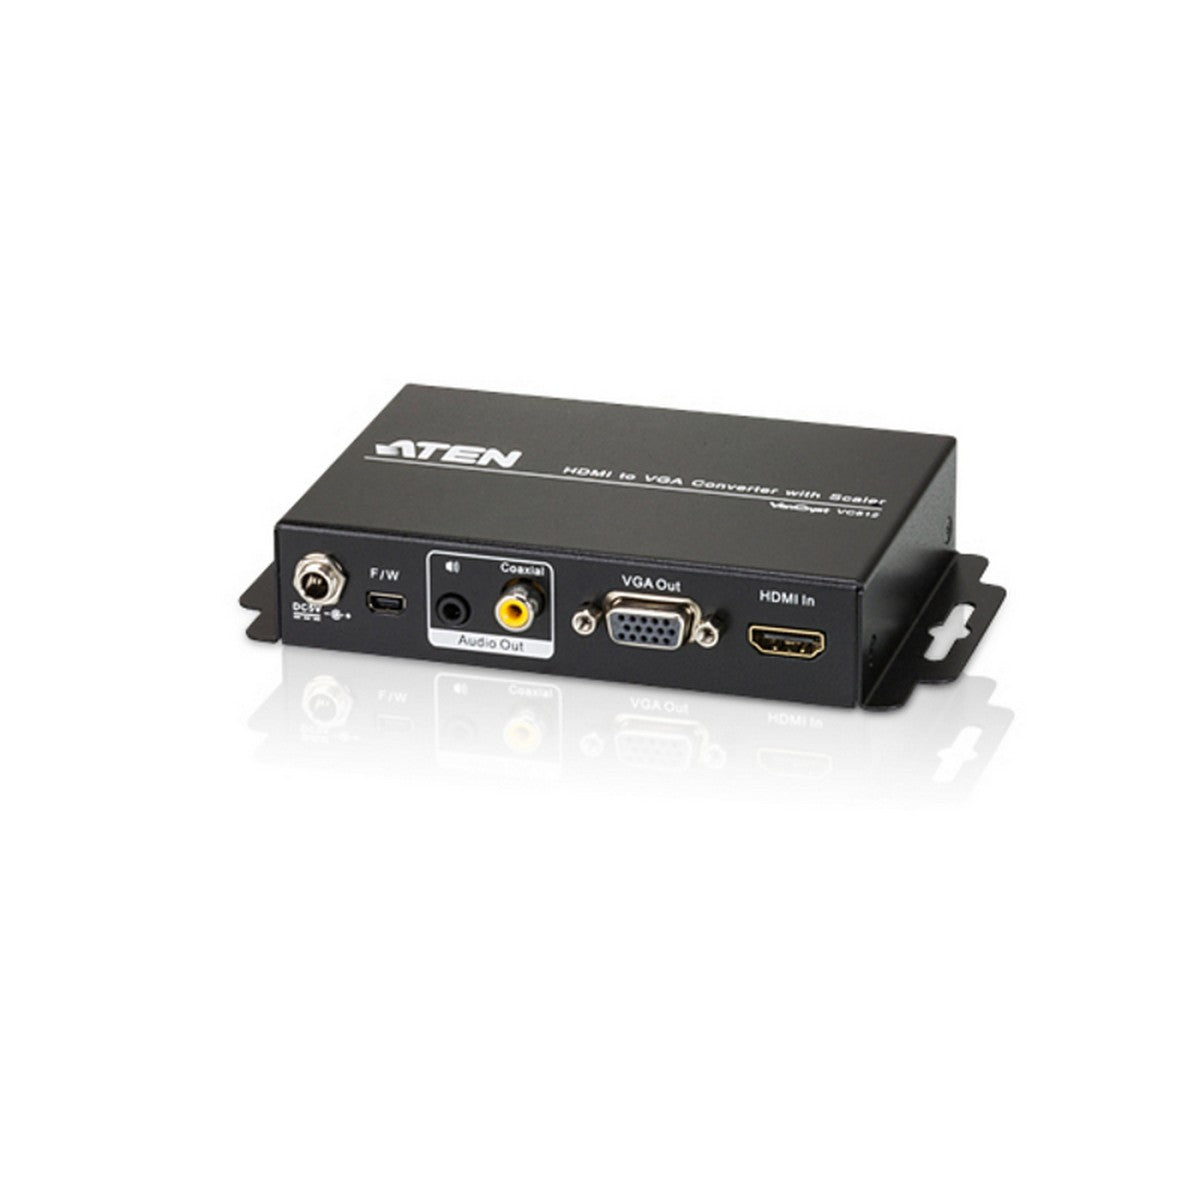 ATEN VC812 | HDMI to VGA with Scaler